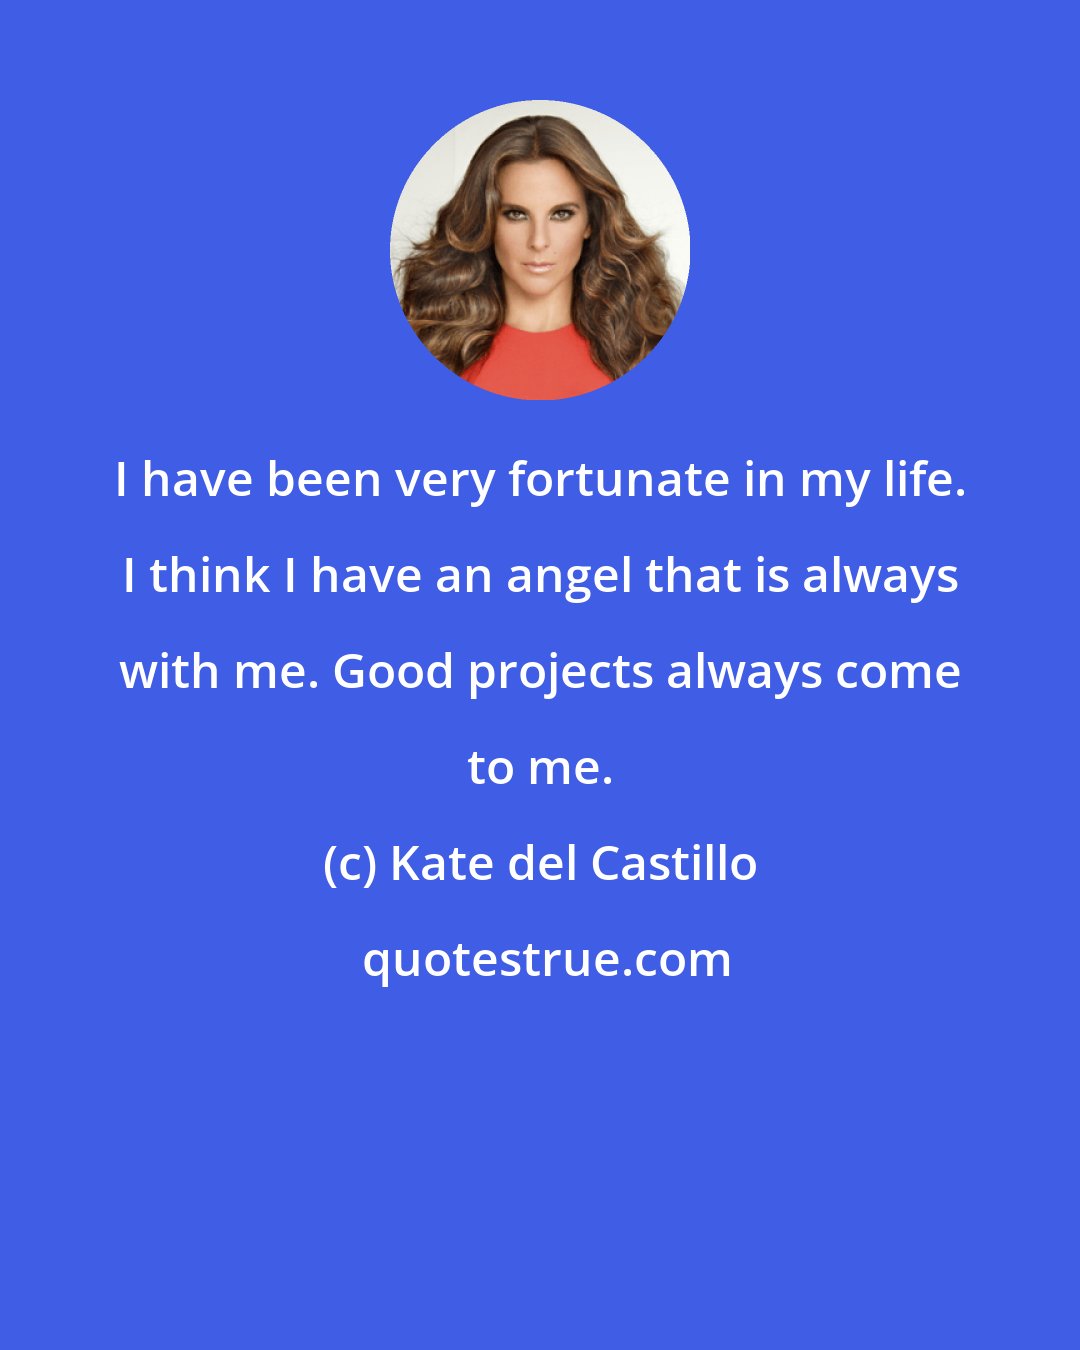 Kate del Castillo: I have been very fortunate in my life. I think I have an angel that is always with me. Good projects always come to me.